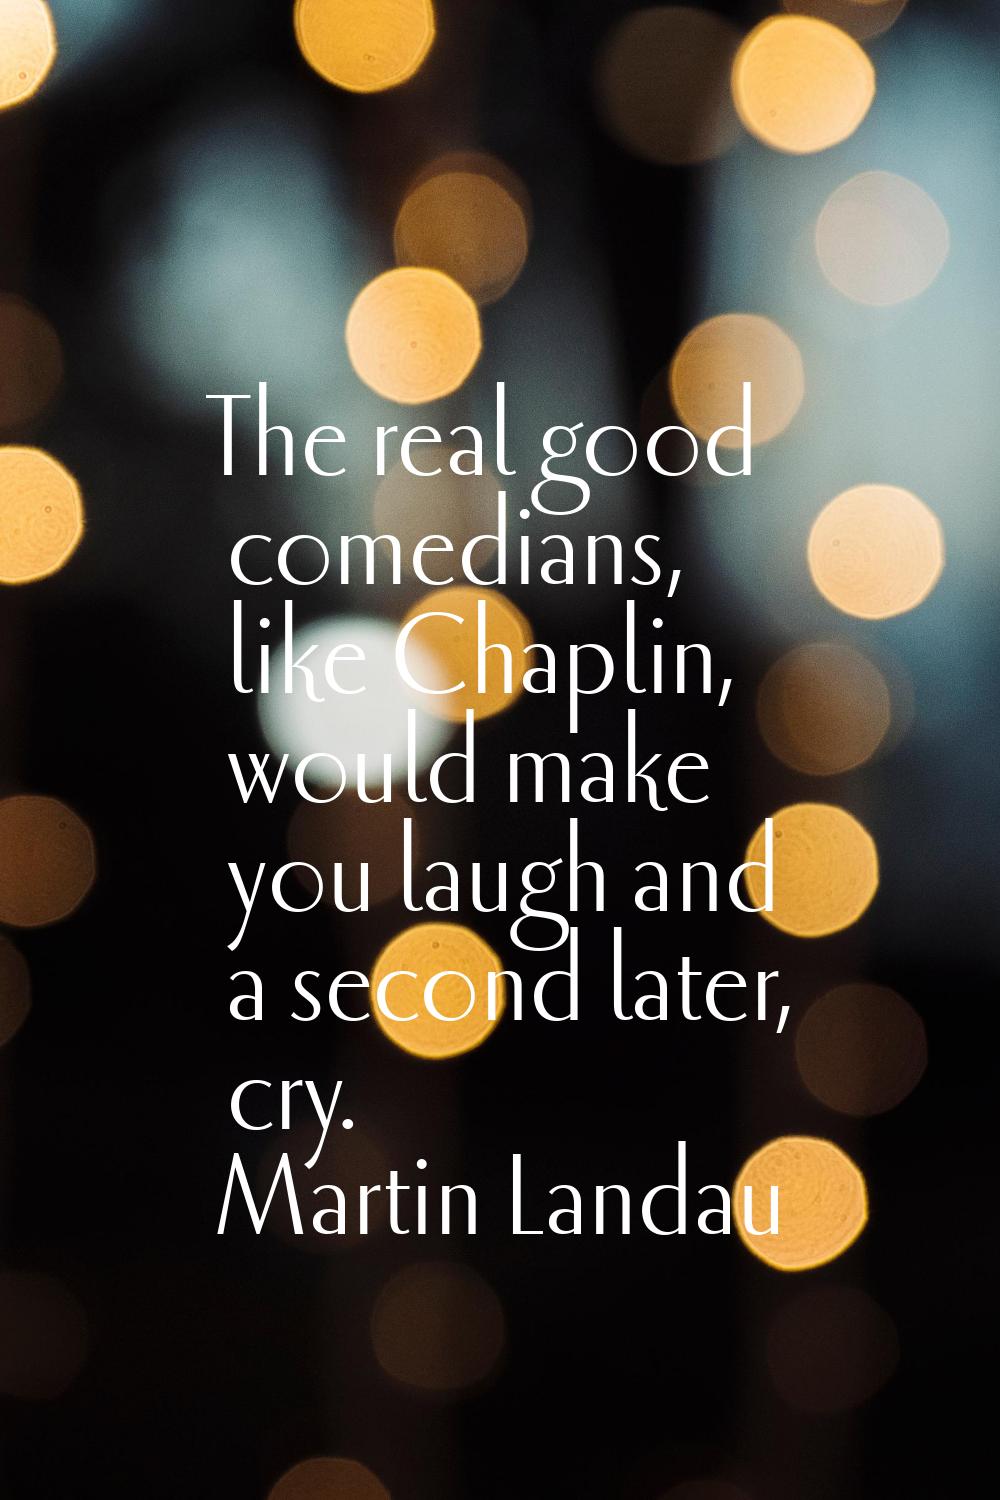 The real good comedians, like Chaplin, would make you laugh and a second later, cry.